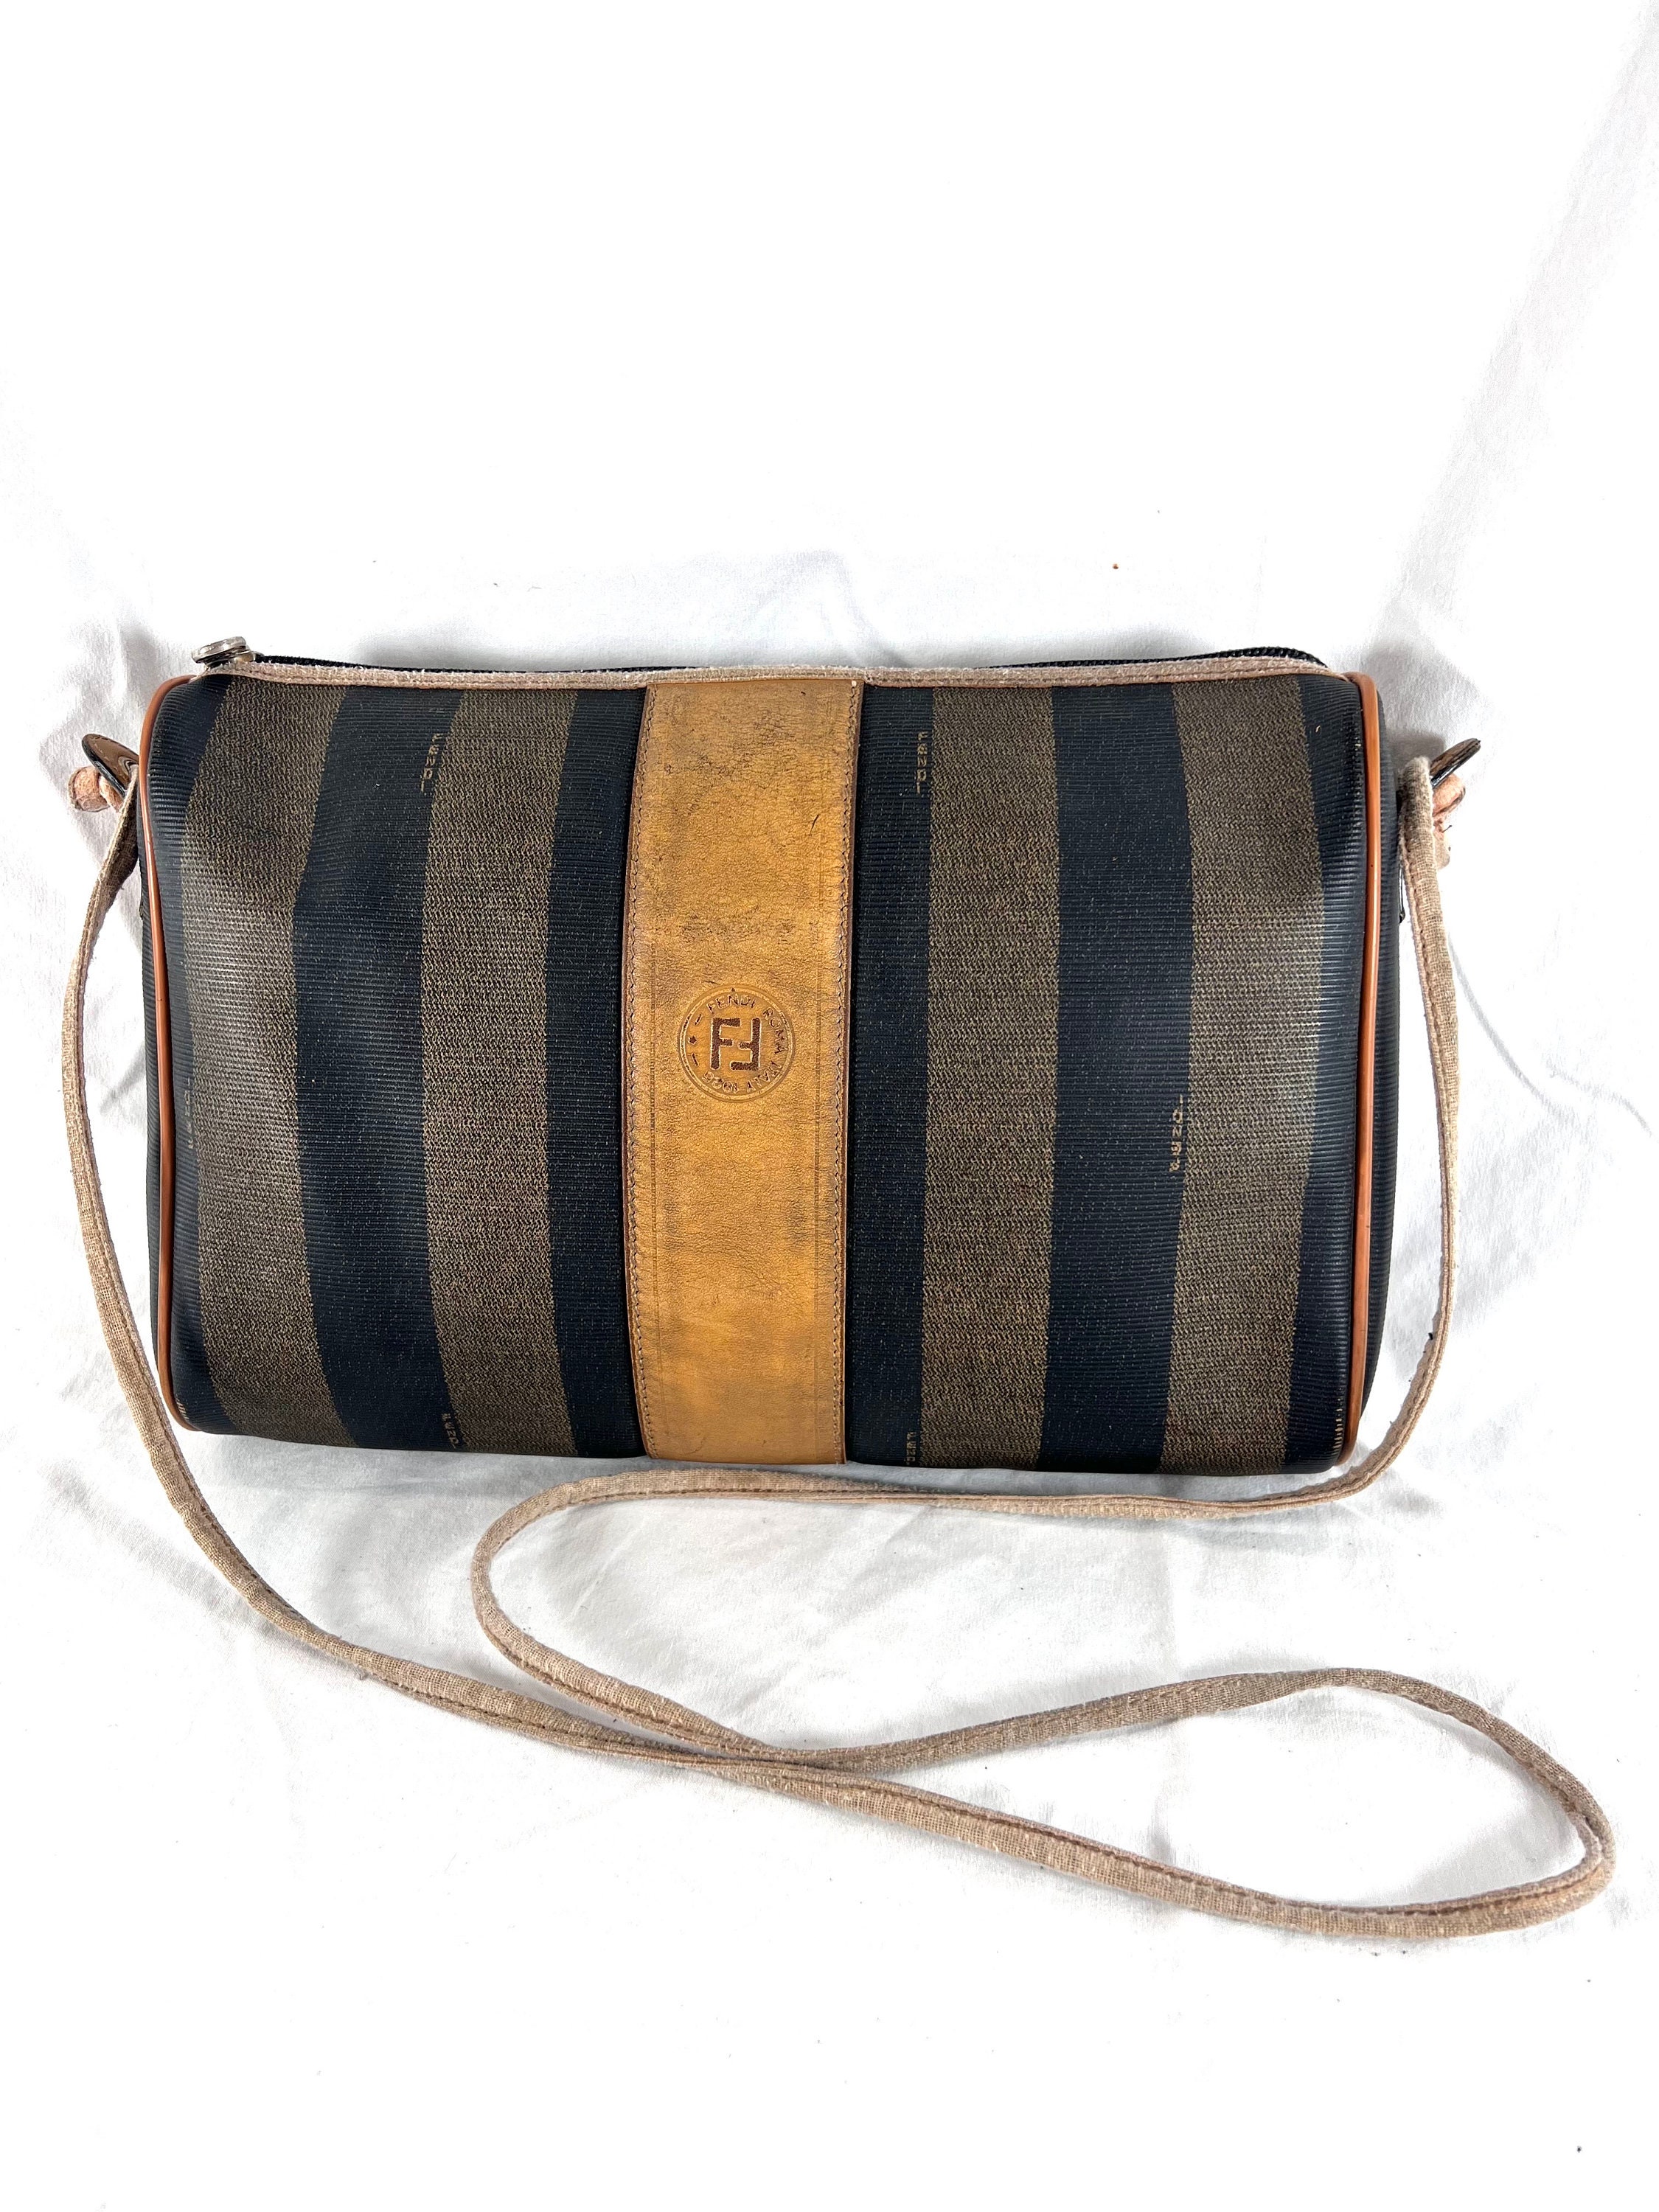 Vintage FENDI Pequin 1980s Crossbody Striped Leather and Coated